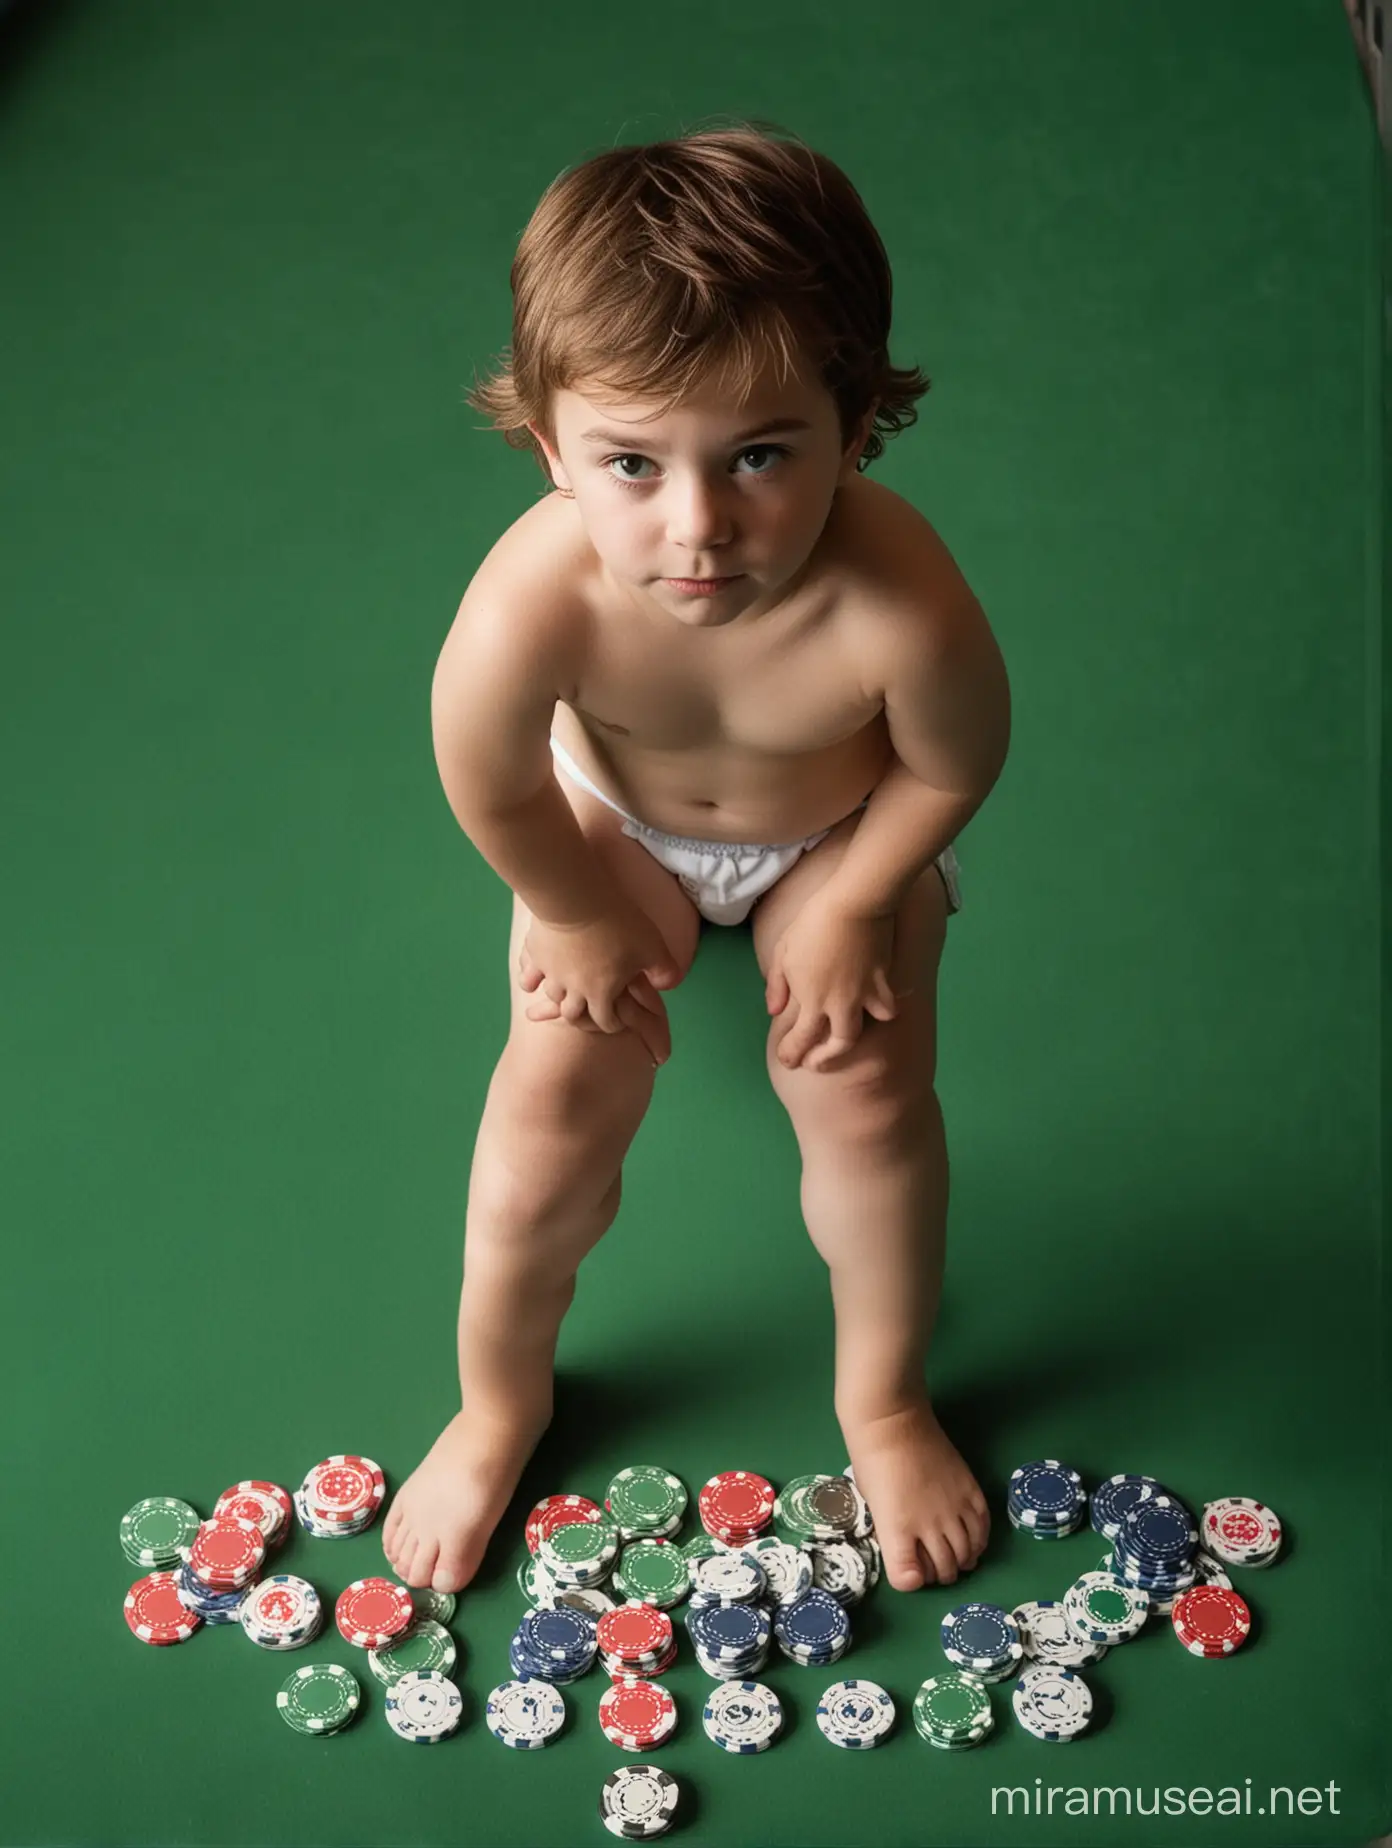 a  child in white briefs in a green poker table, he is surrounded by poker chips